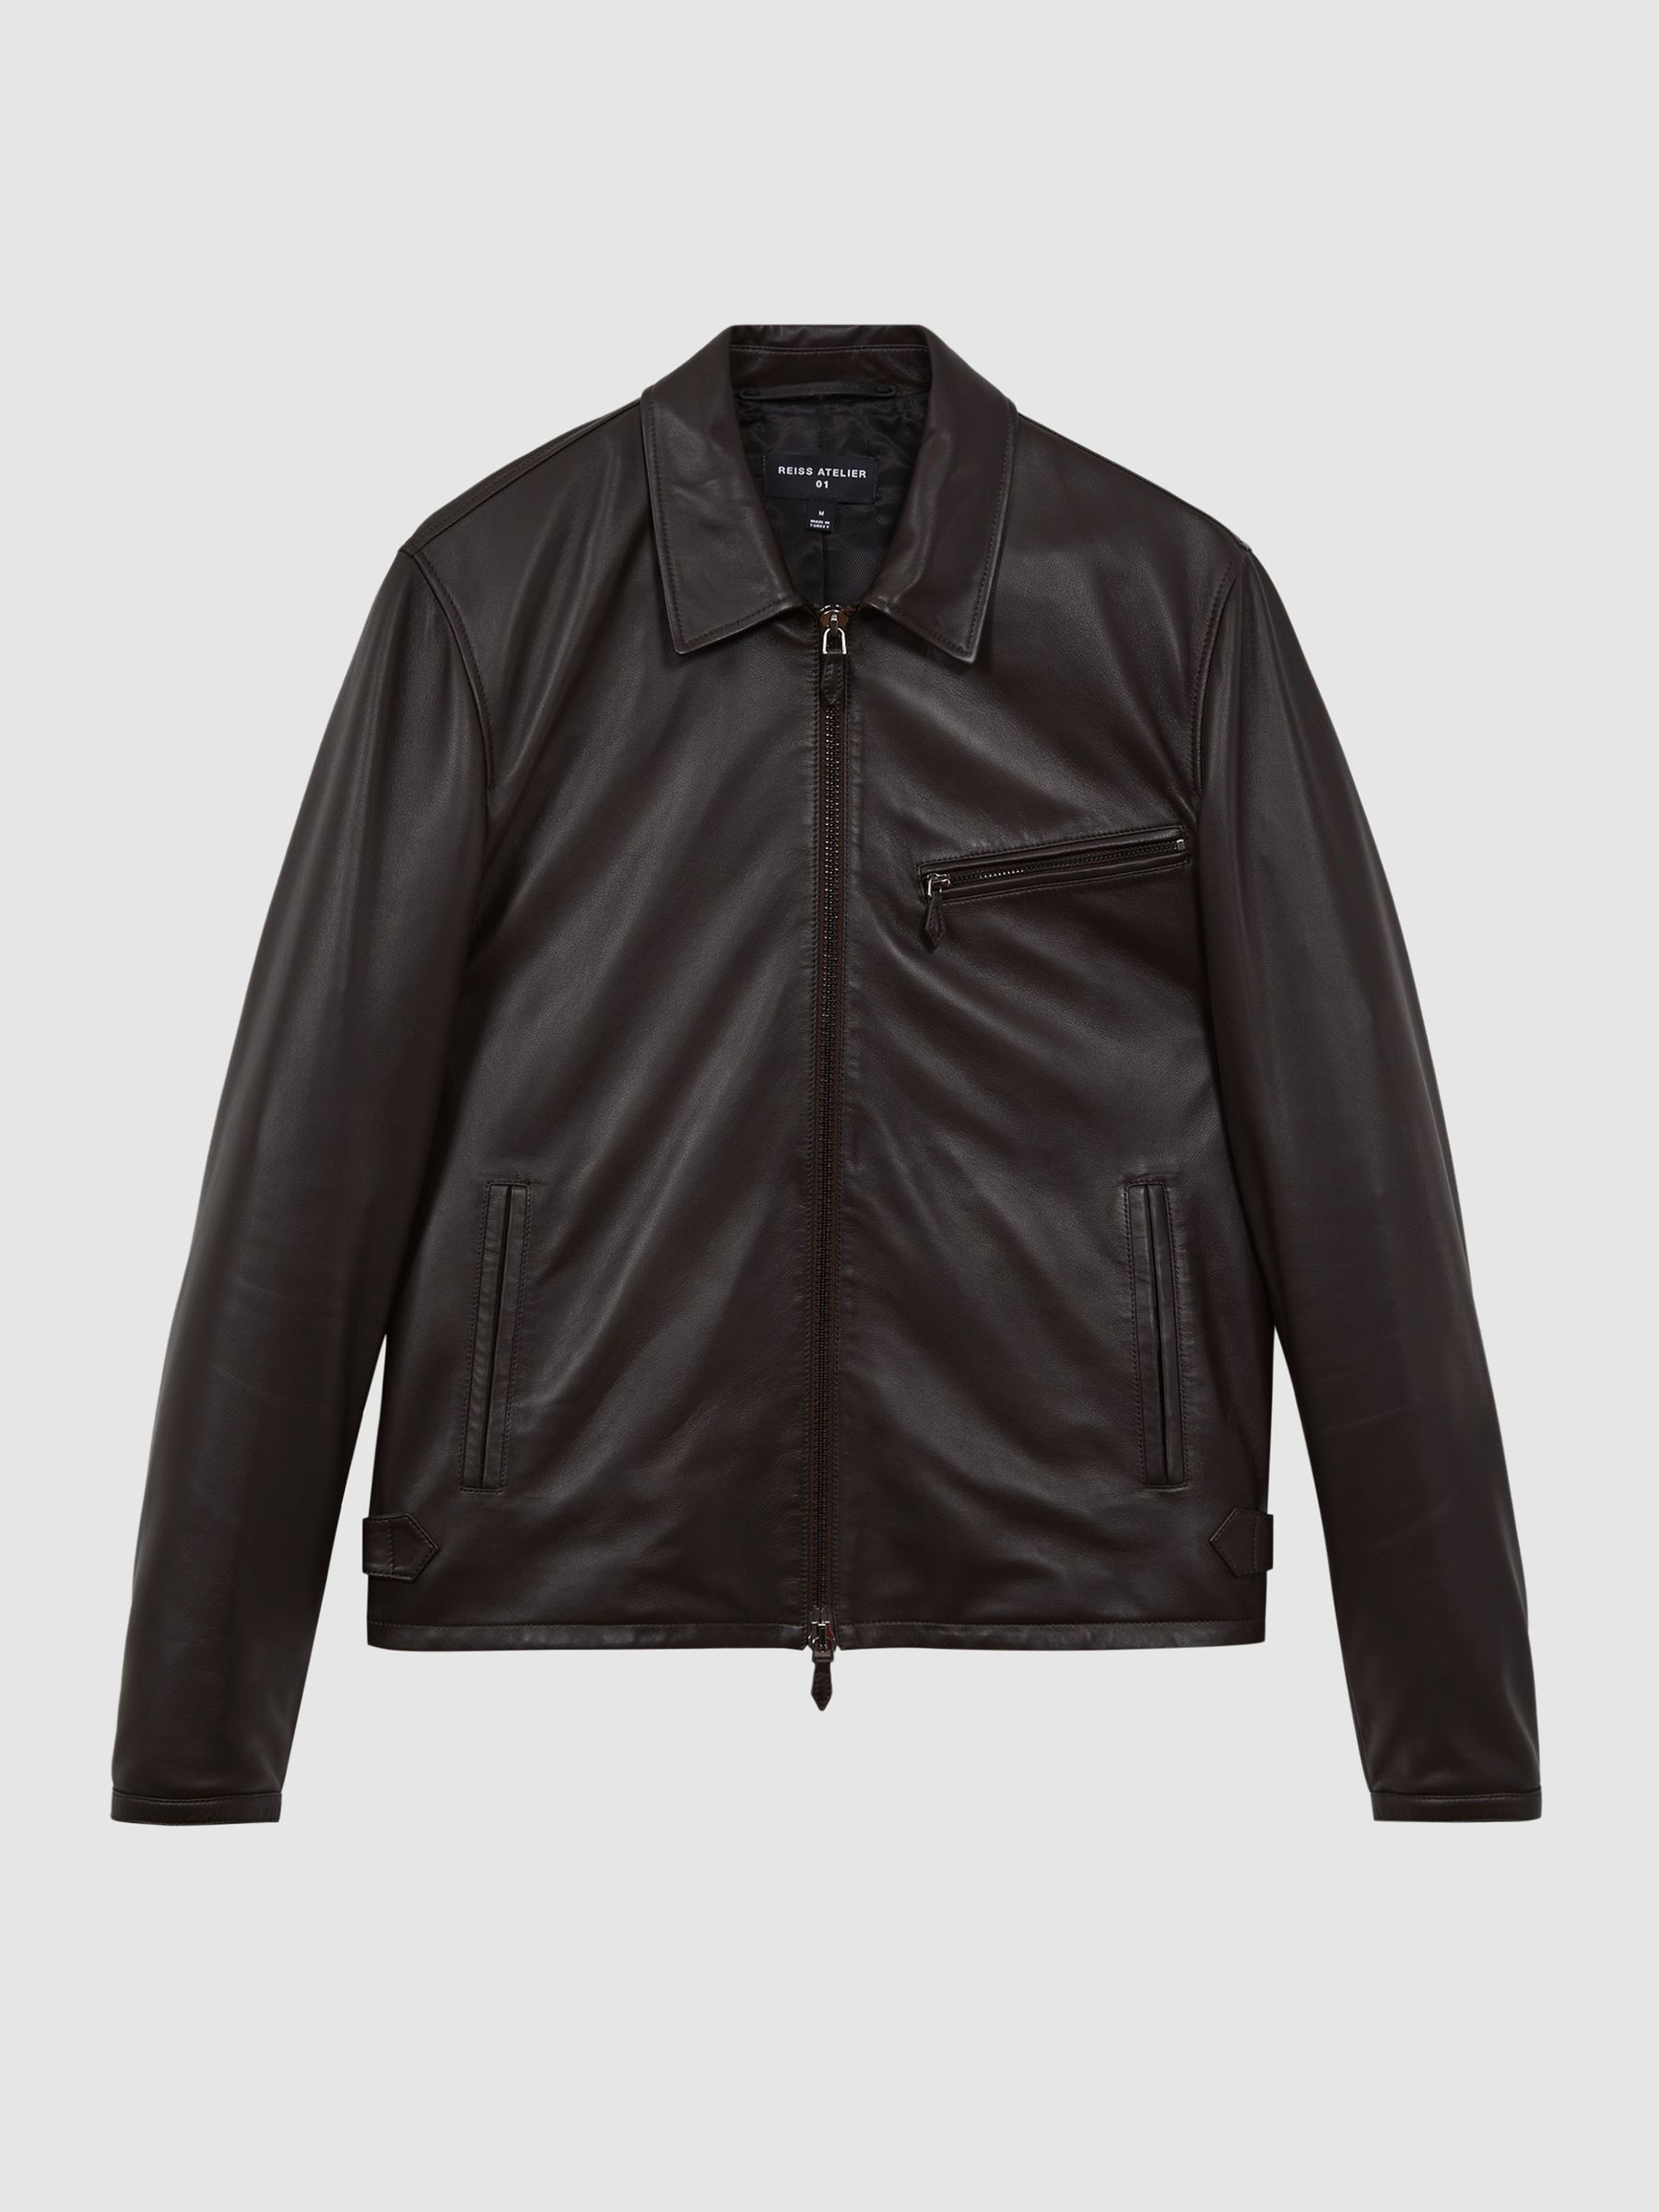 Different leather jacket types to choose